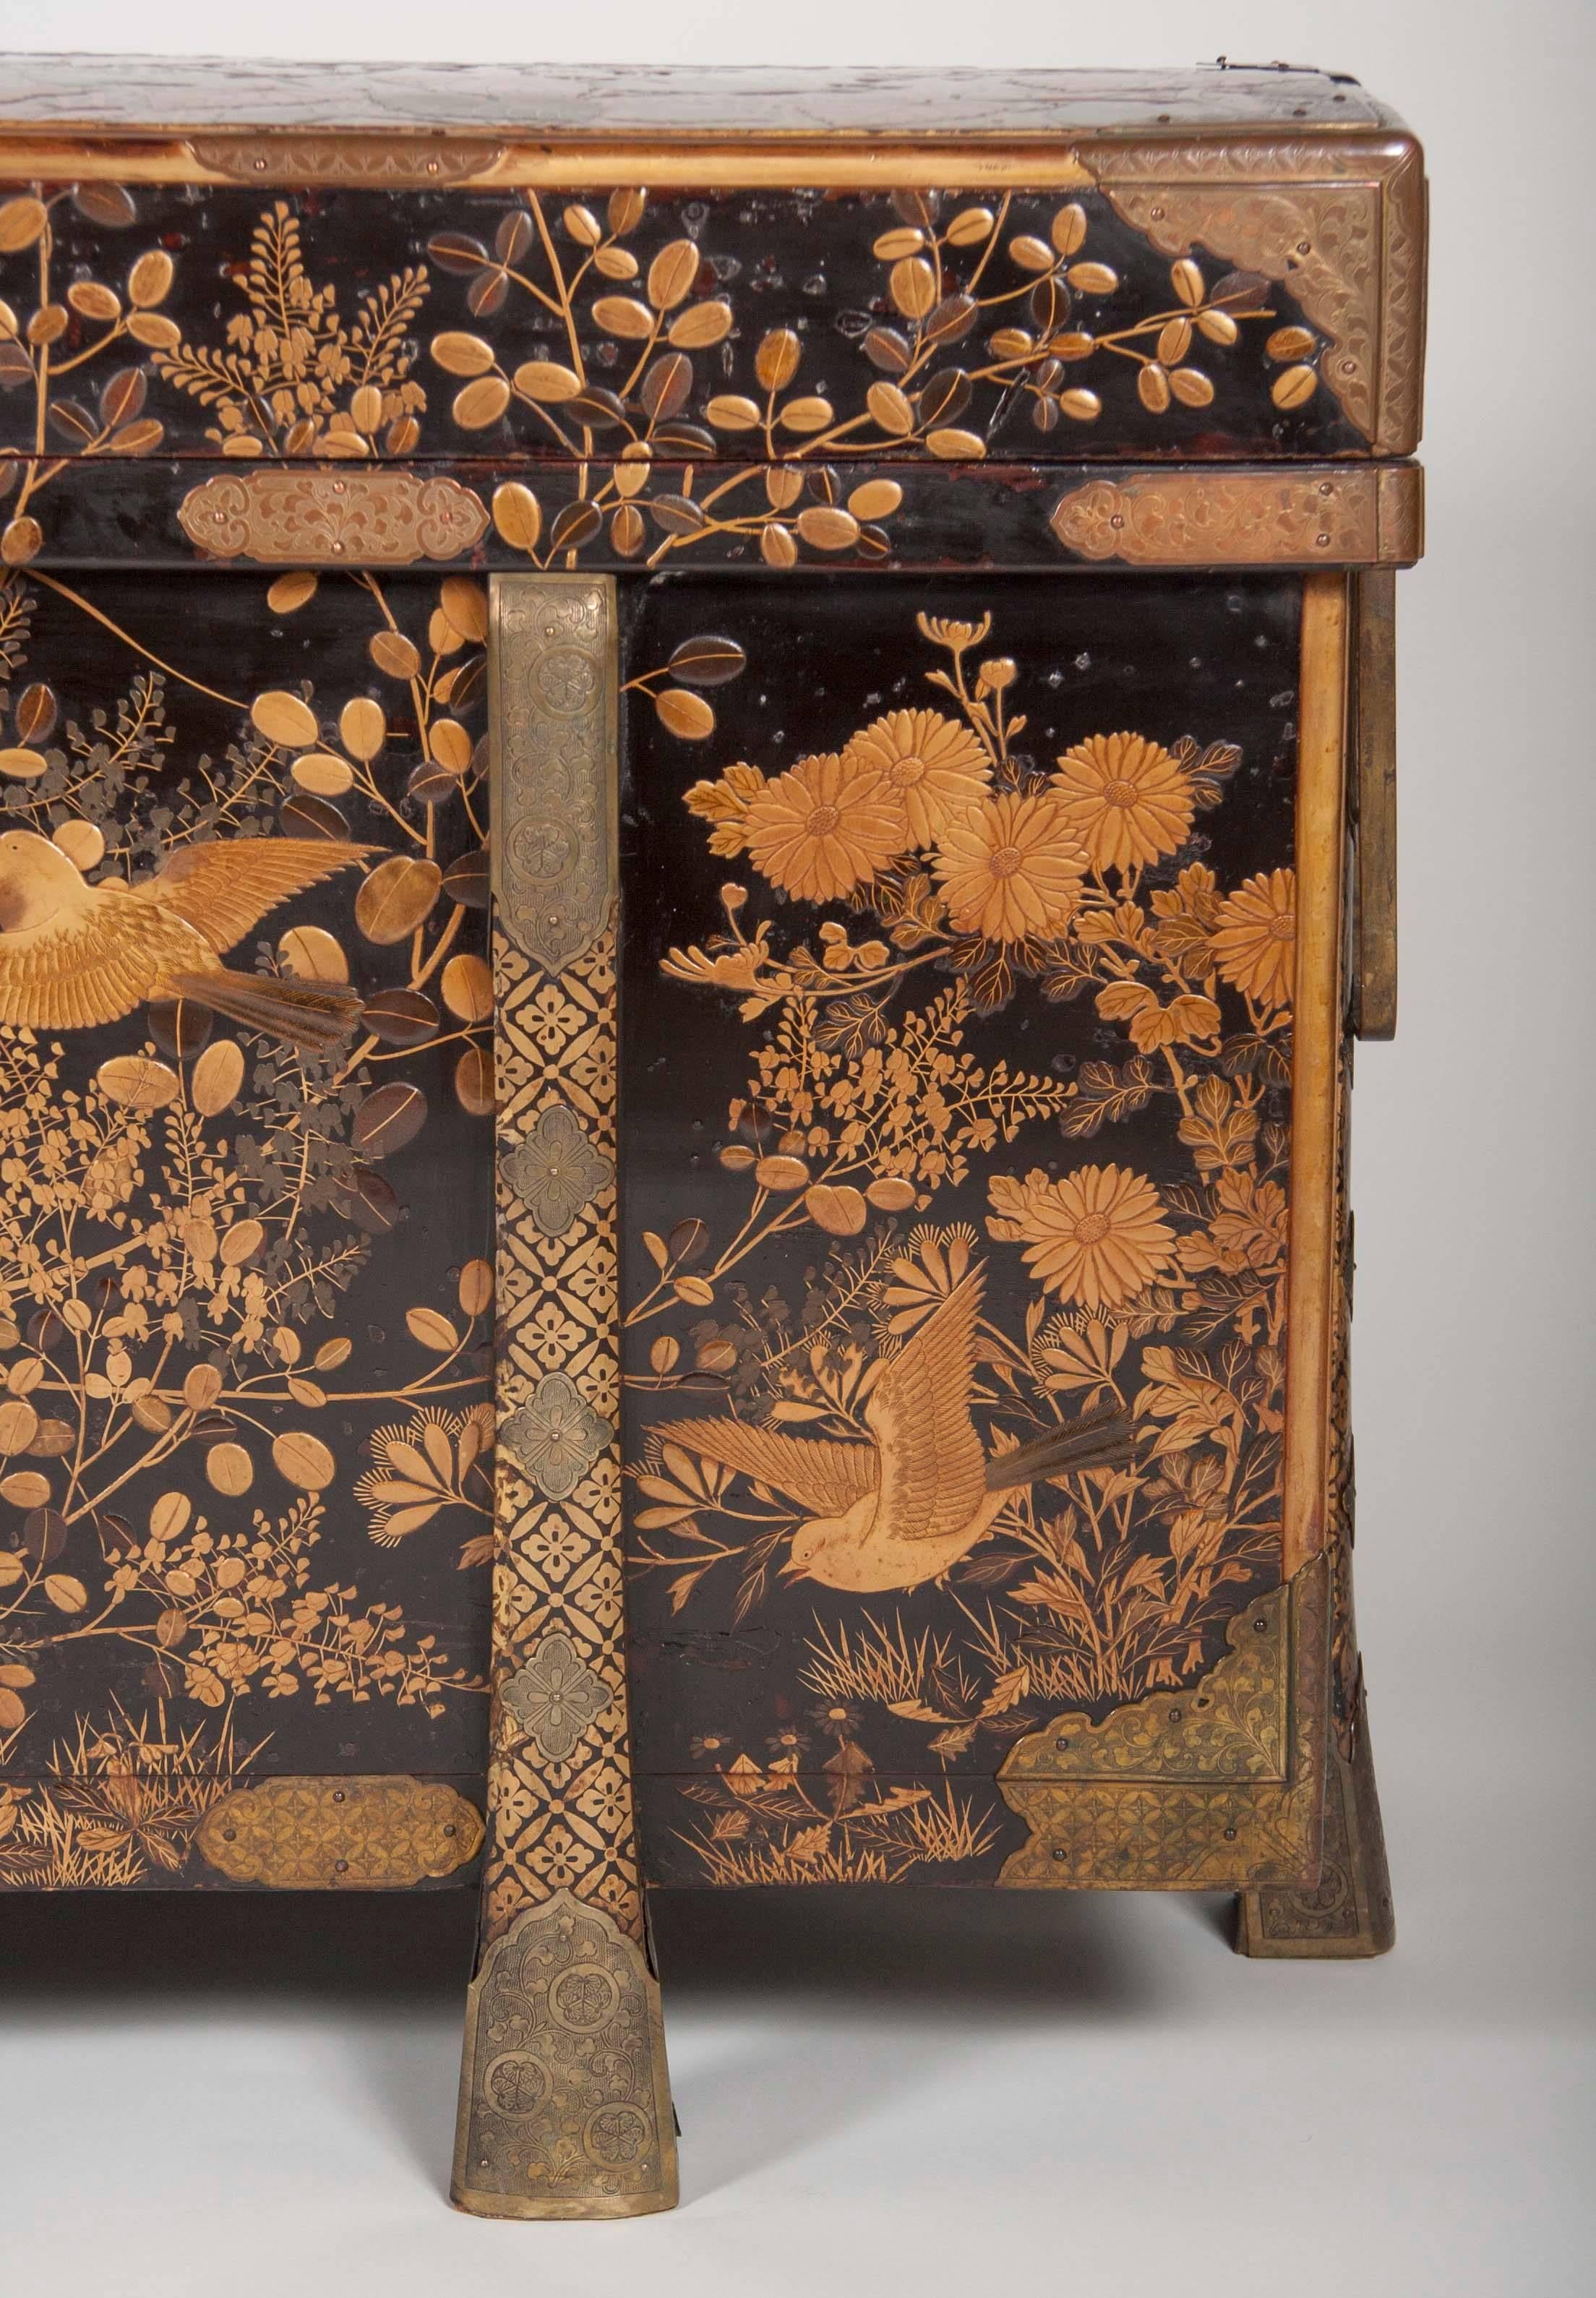 19th Century Large Japanese Gilt and Black Lacquer Karabitsu Chest with Bronze Mounts